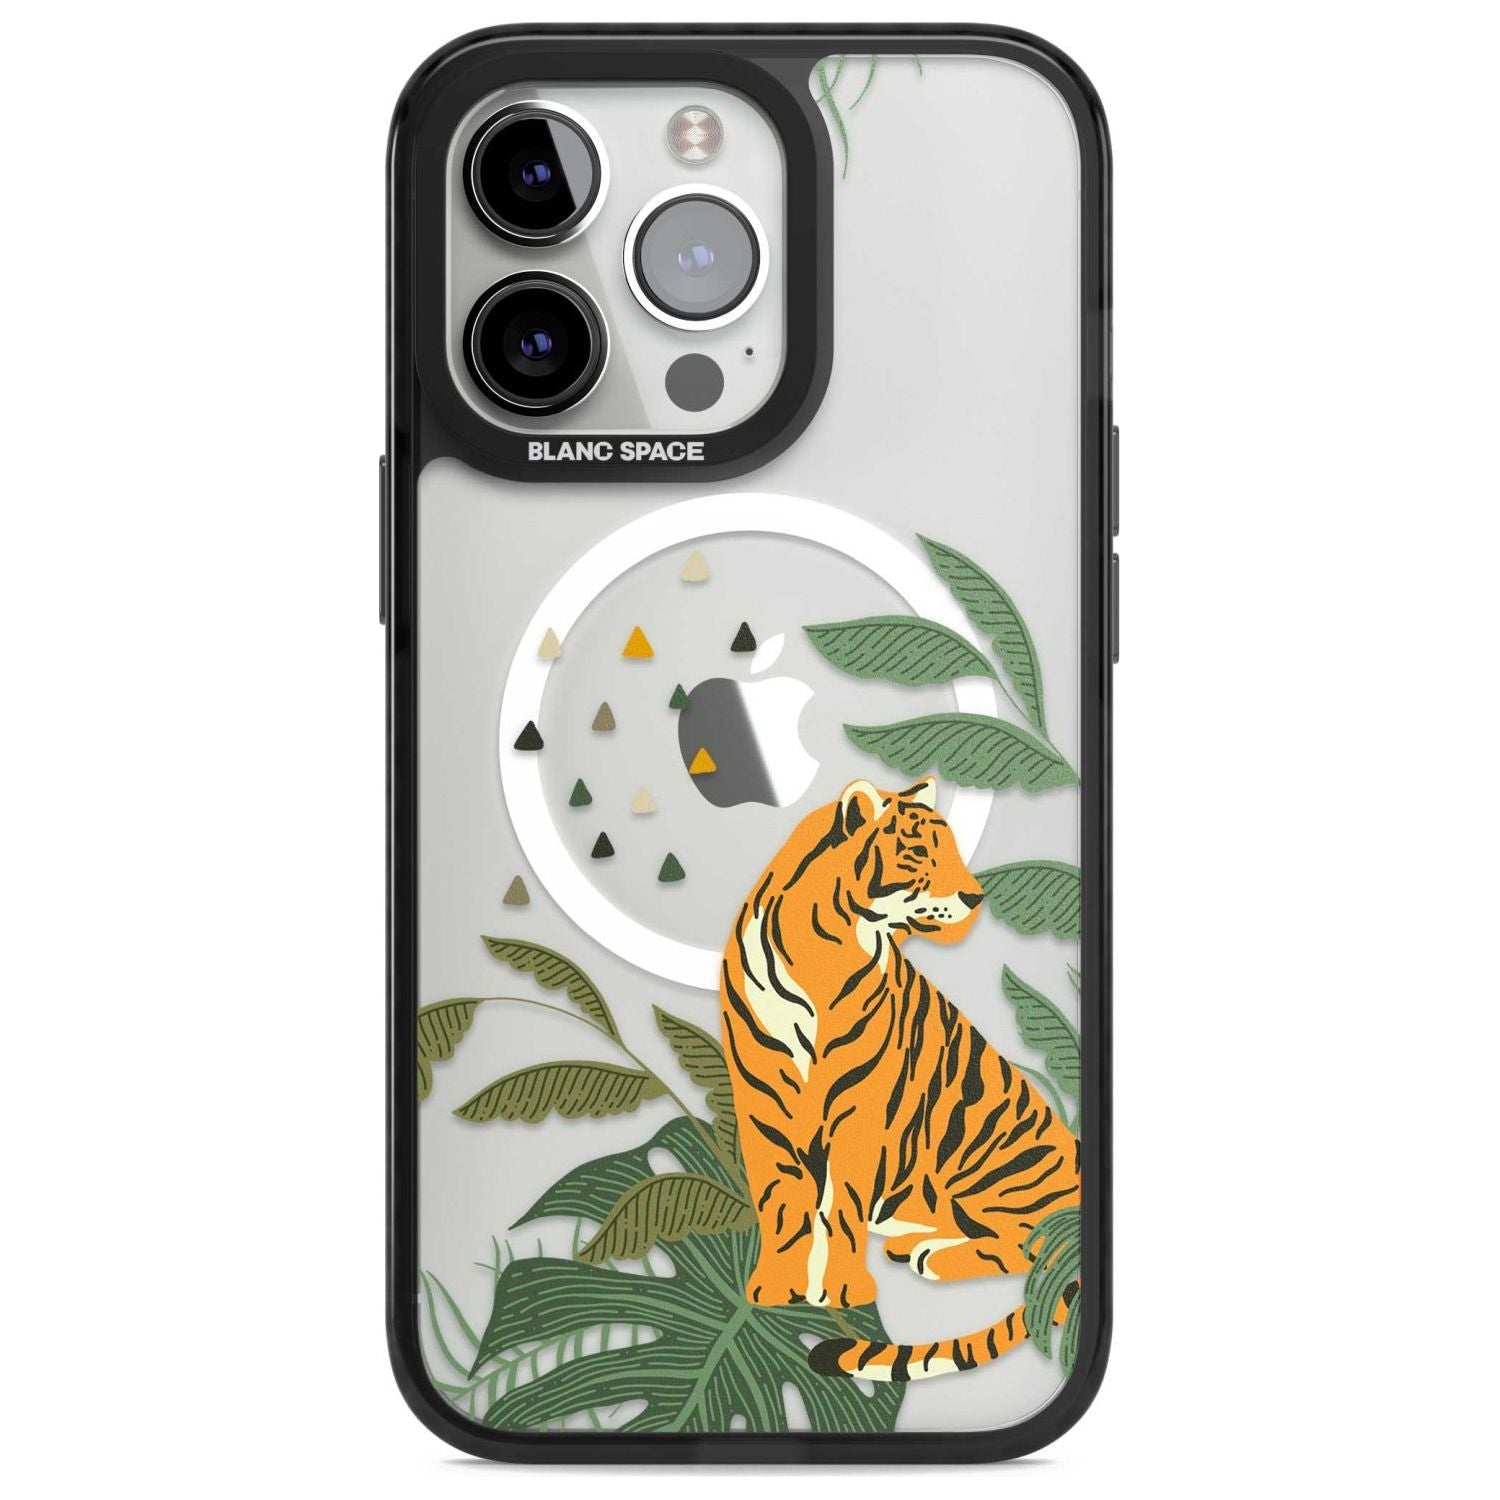 Large Tiger Clear Jungle Cat Pattern Phone Case iPhone 15 Pro Max / Magsafe Black Impact Case,iPhone 15 Pro / Magsafe Black Impact Case,iPhone 14 Pro Max / Magsafe Black Impact Case,iPhone 14 Pro / Magsafe Black Impact Case,iPhone 13 Pro / Magsafe Black Impact Case Blanc Space